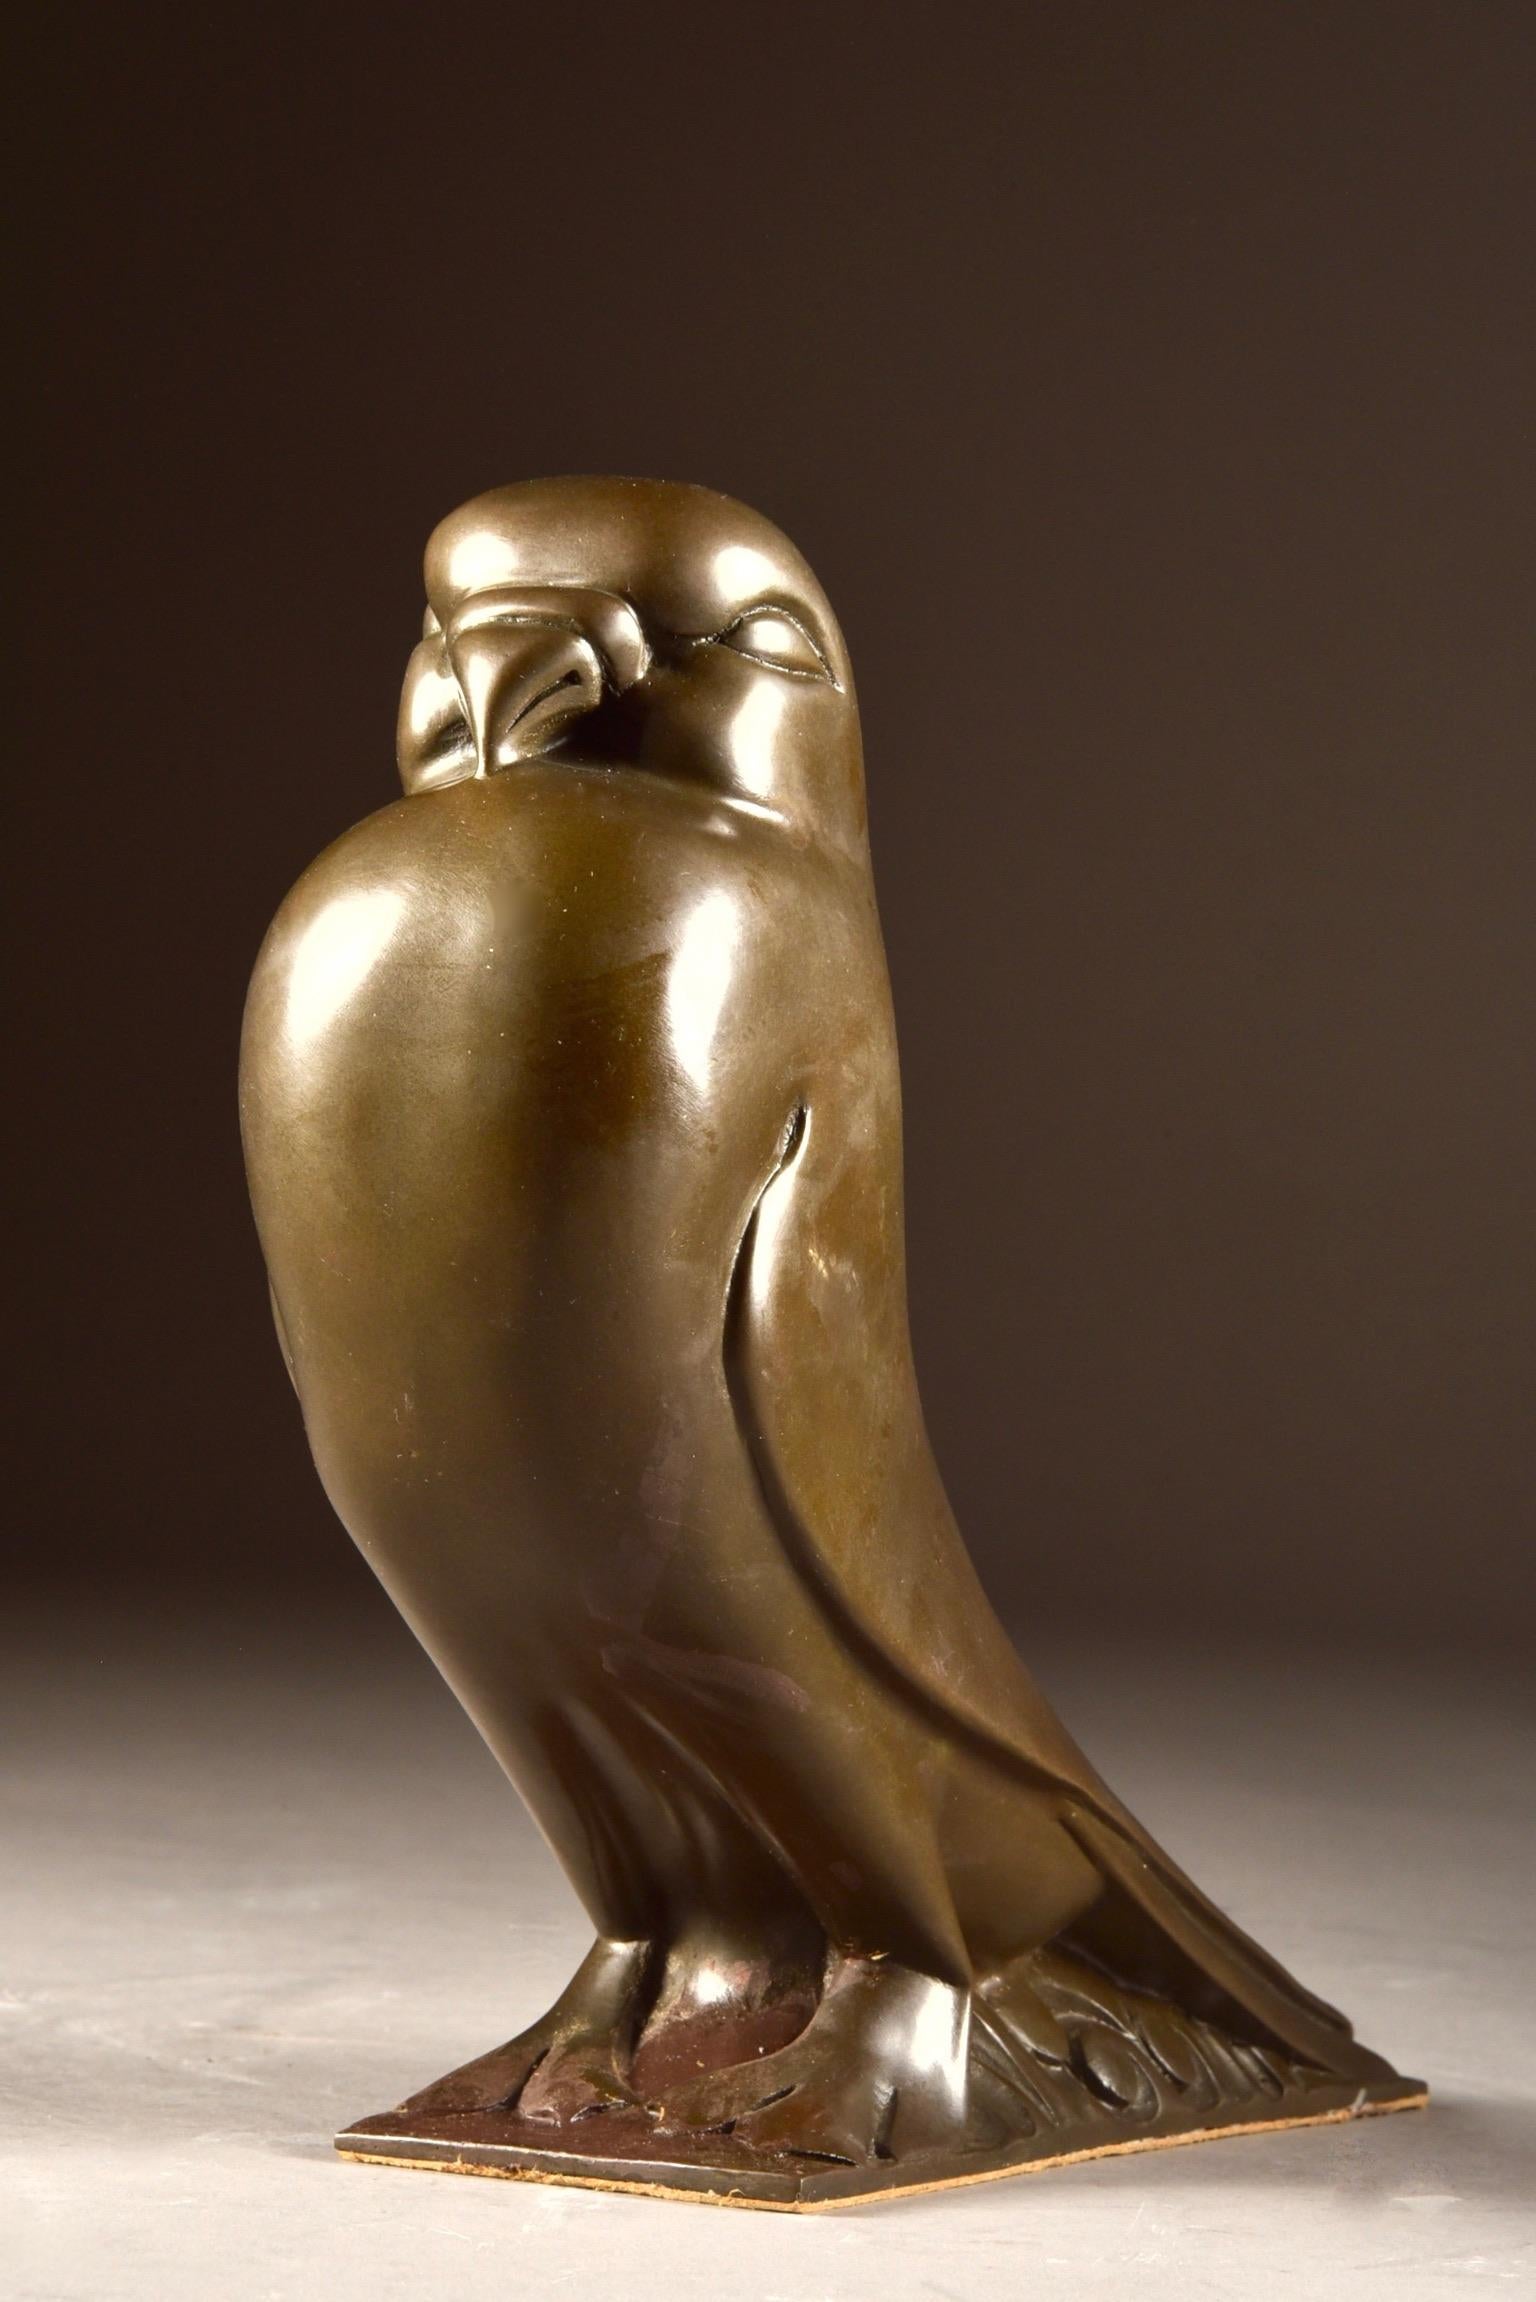 A bronze sculpture of a pigeon in art deco style. A beautiful statue for the lover of the followers and Art Deco style.